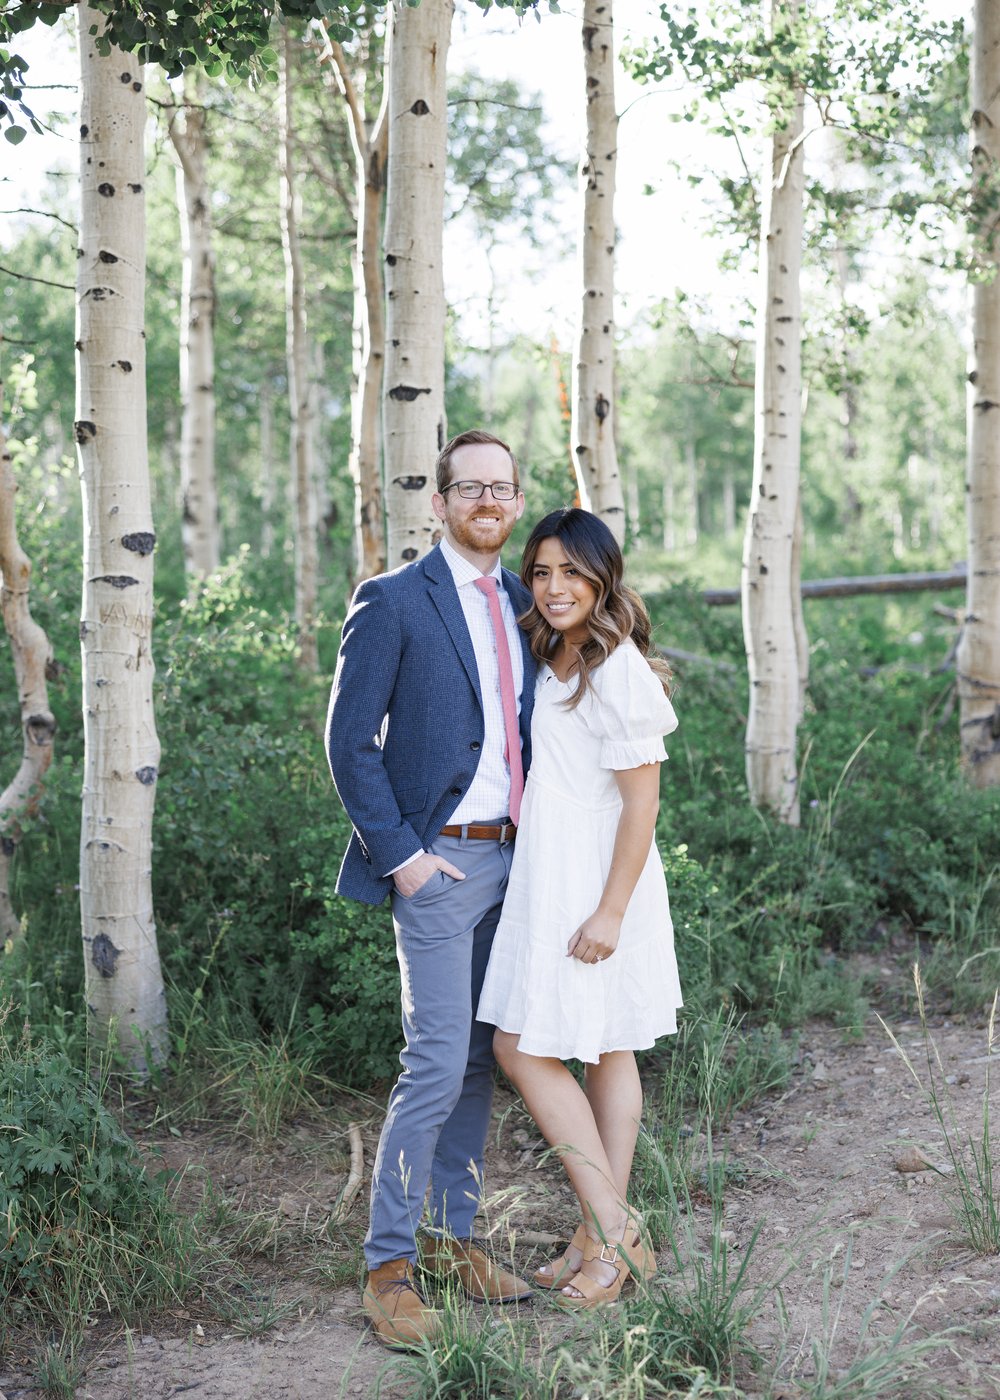  woman in a white flowy dress and a man in blue suit take engagements in the Park City mountains by Savanna Richardson Photography. outdoor #ParkCityEngagements #ParkCityPhotographers #SavannaRichardsonPhotography #SavannaRichardsonEngagements   